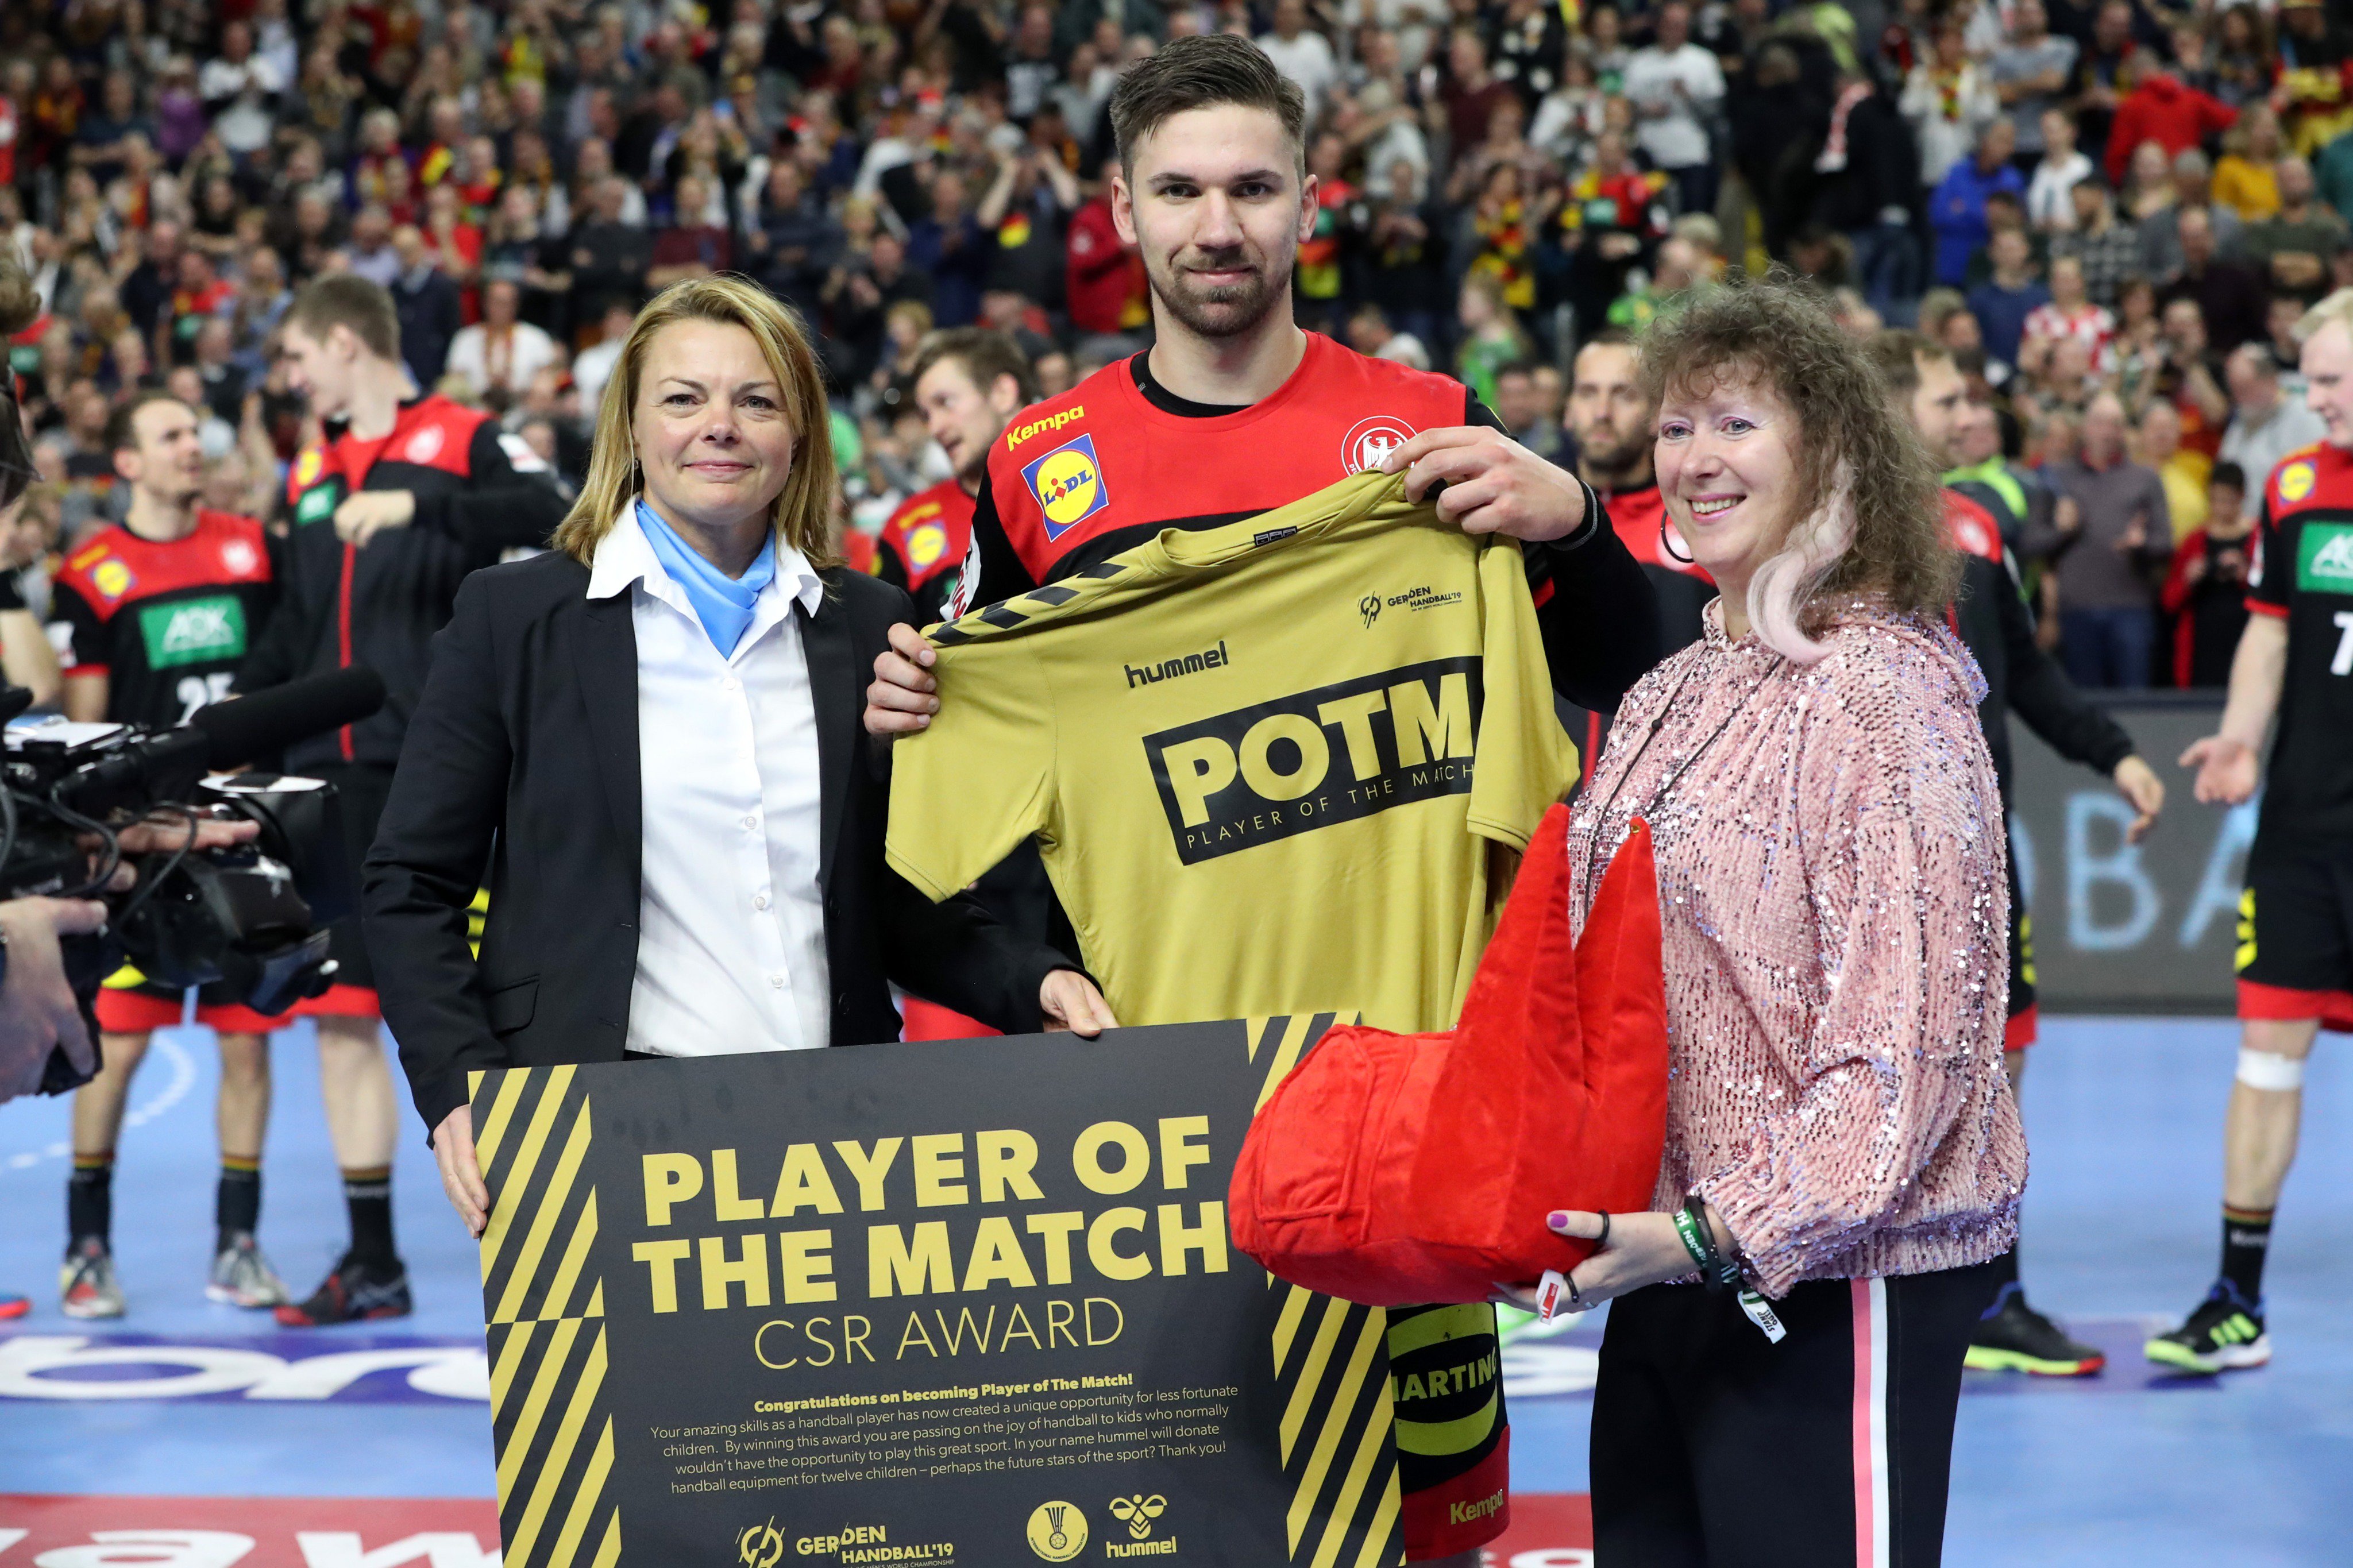 hummel Twitter: ambassador Fabian Wiede was celebrated as hummel Player of The Match after the game against Croatia at the 2019 @ihf_info World Men's Handball Championships last night 🔥👊 Also